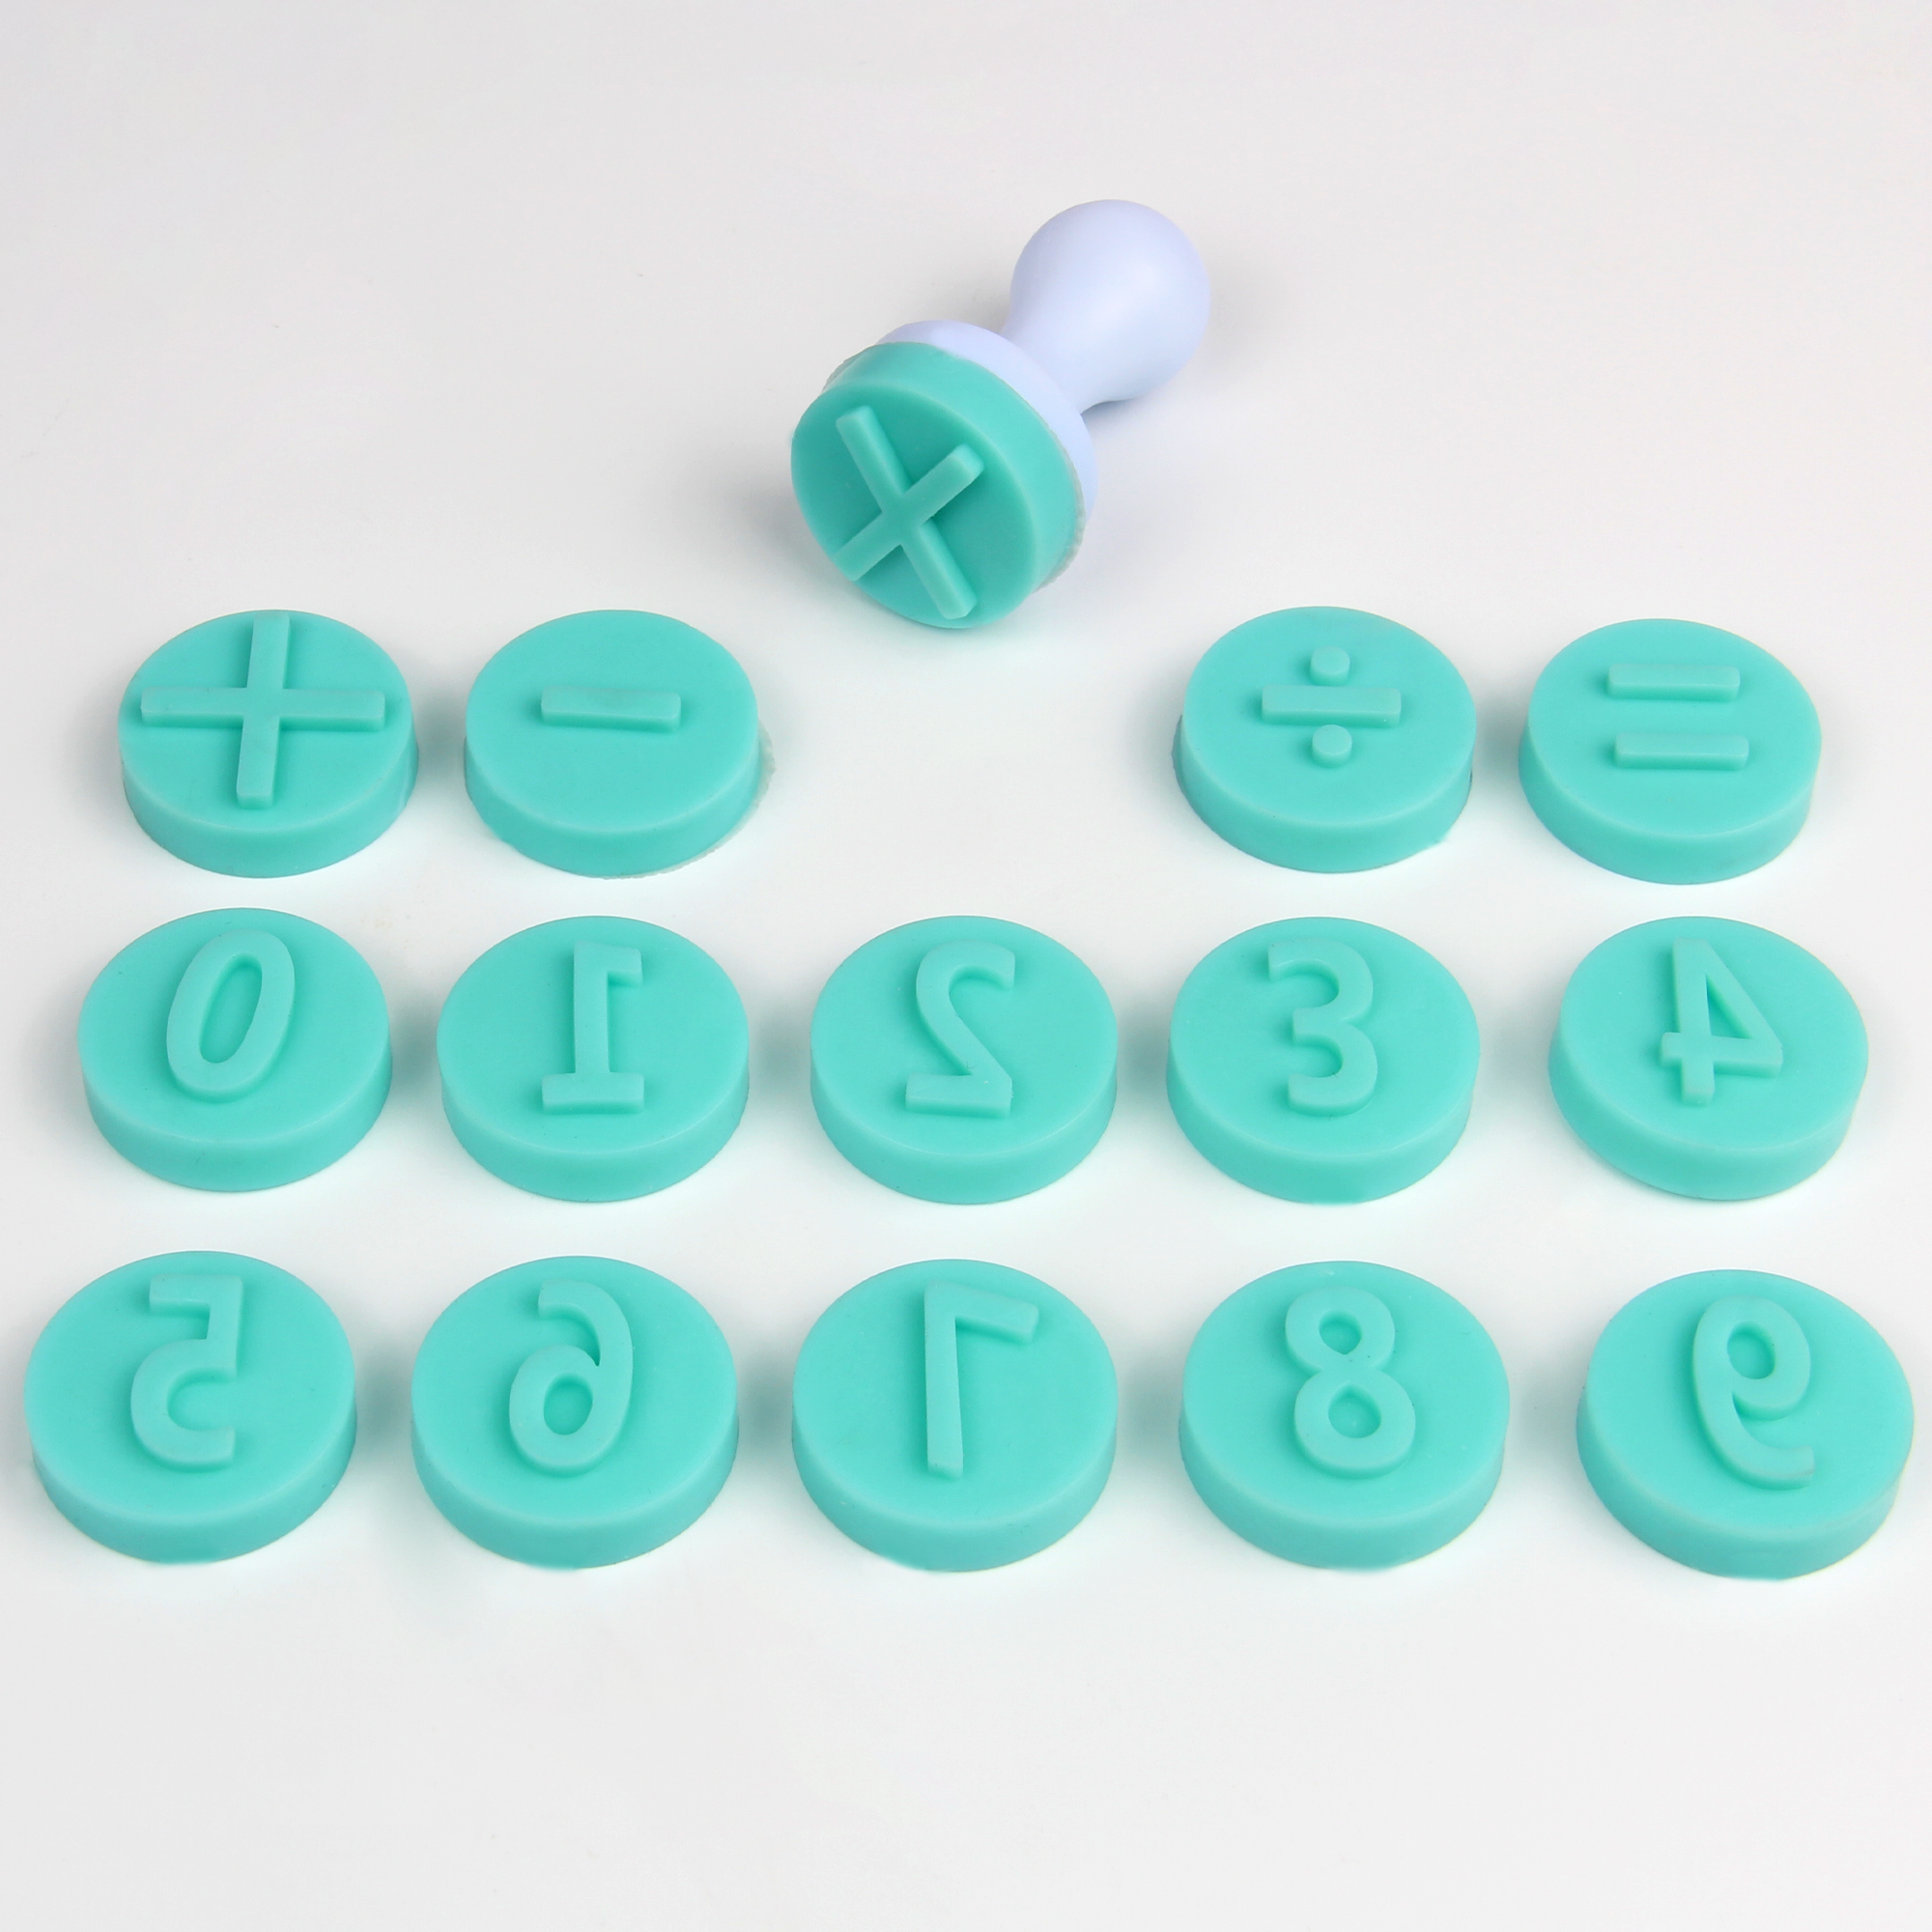 HB1057I 16pcs Silicone Numbers&Calculation Symbols Stamp Set with plastic press handle